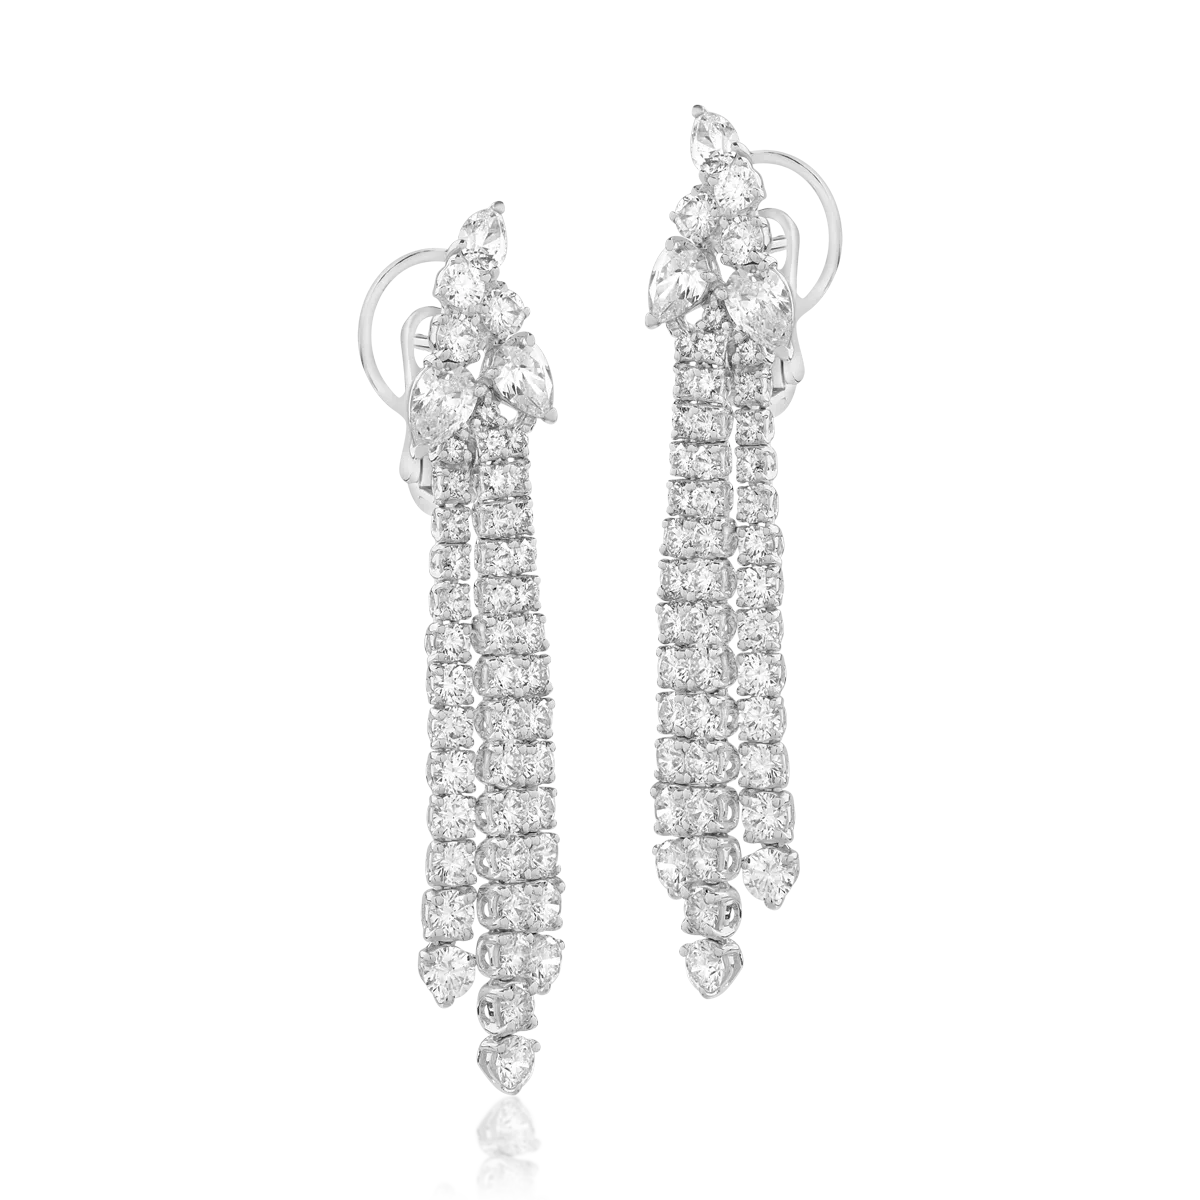 18K white gold earrings with 6.9ct diamonds